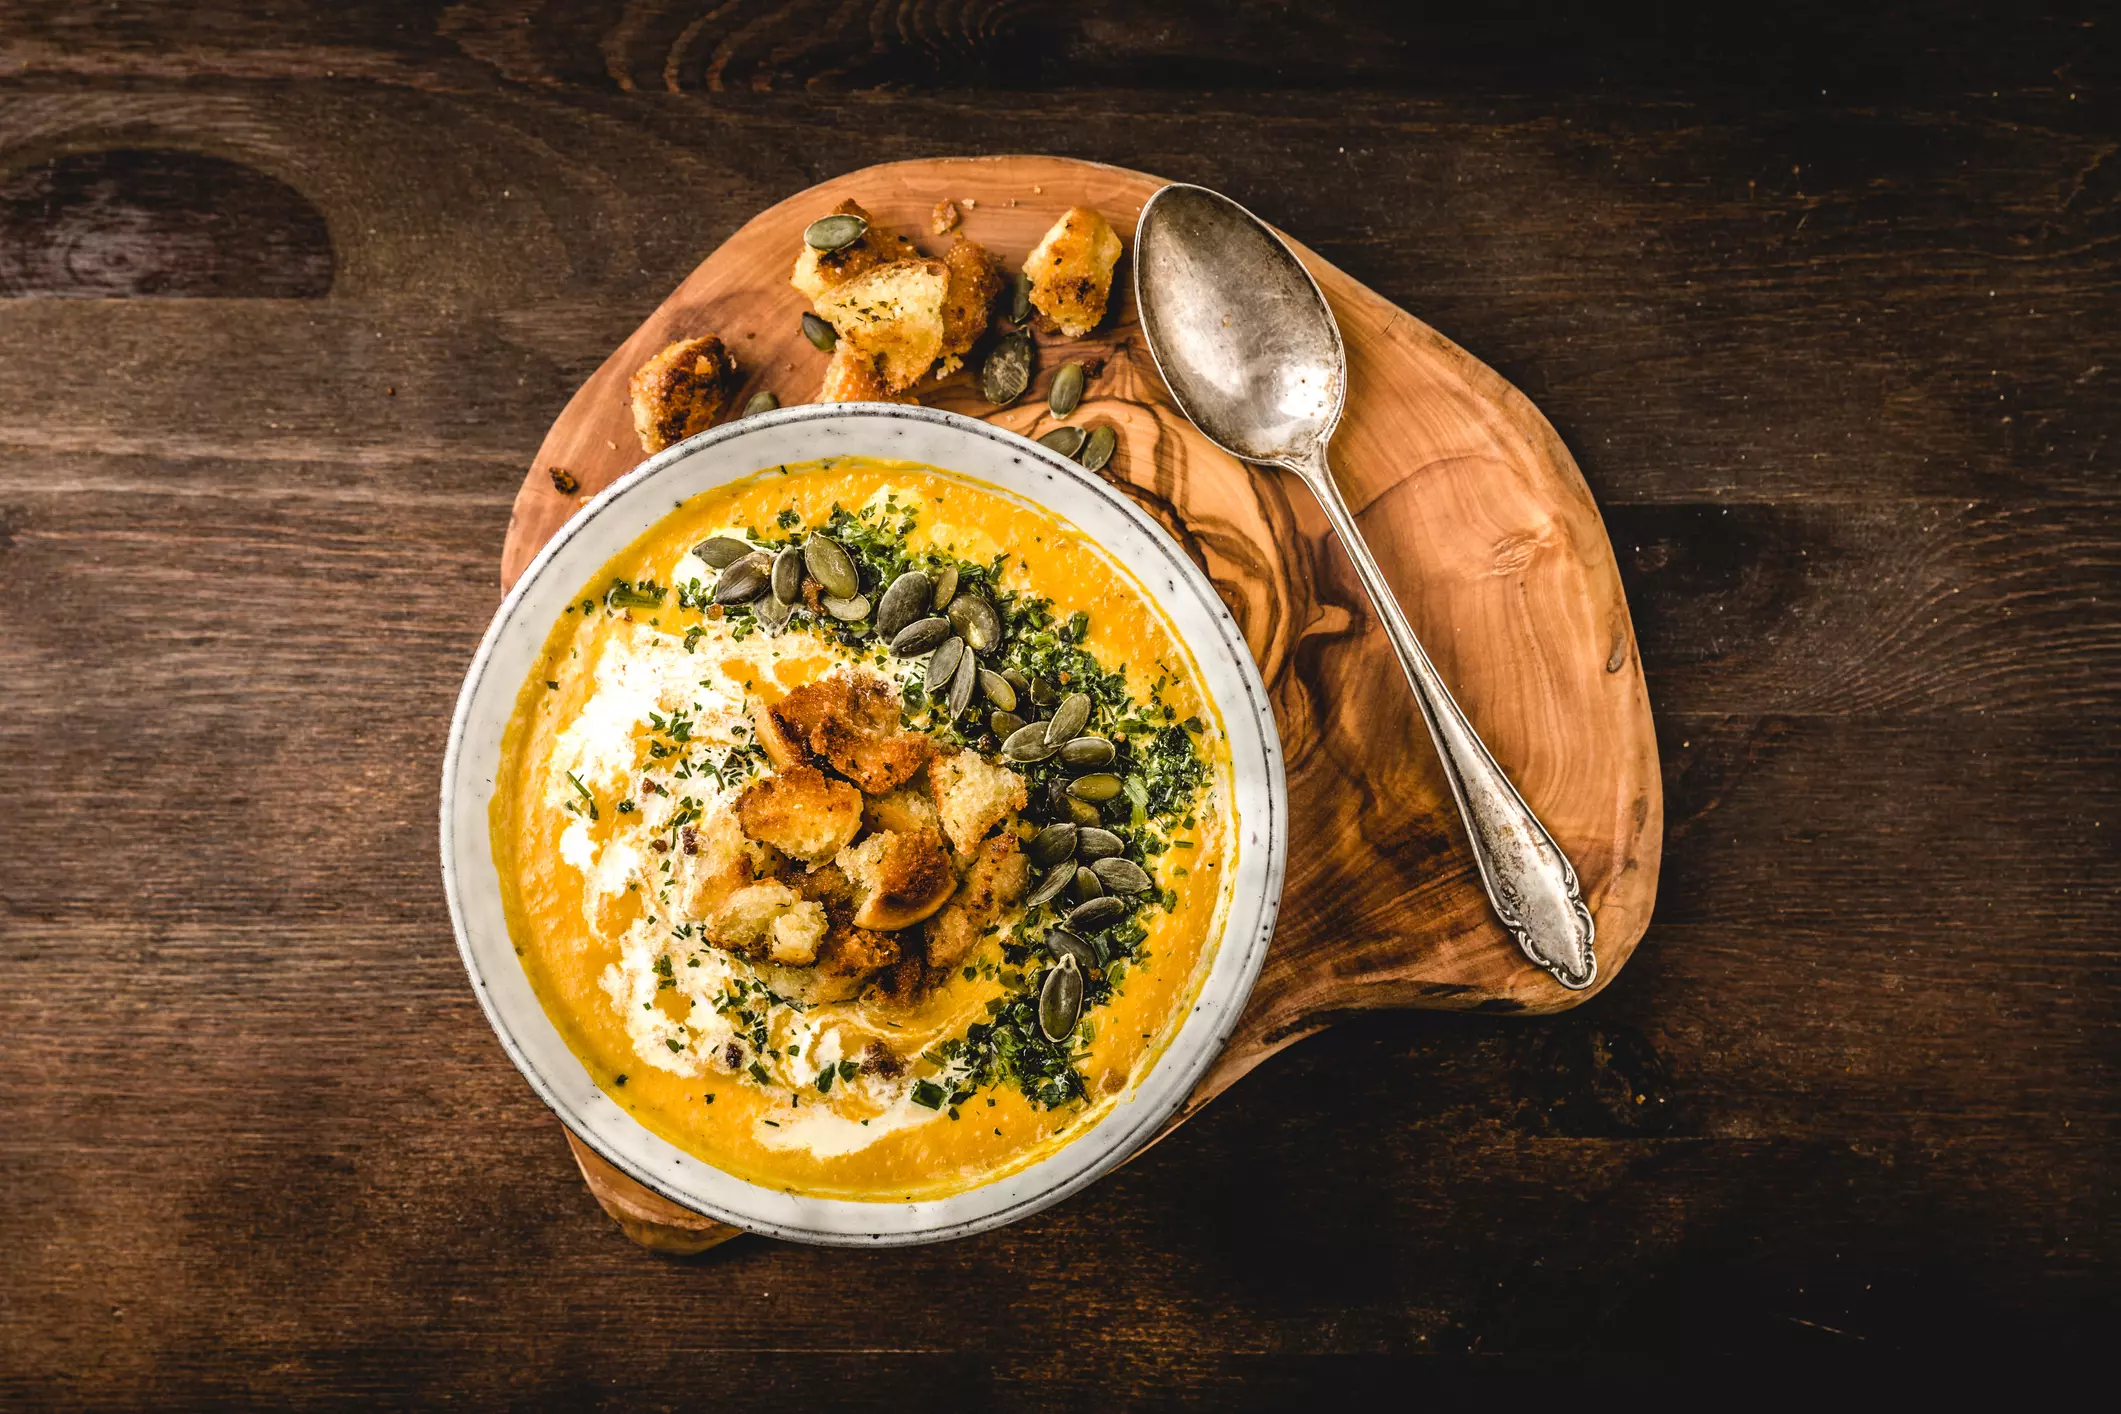 Pumpkin Soup With Cream,Herbs And Seeds